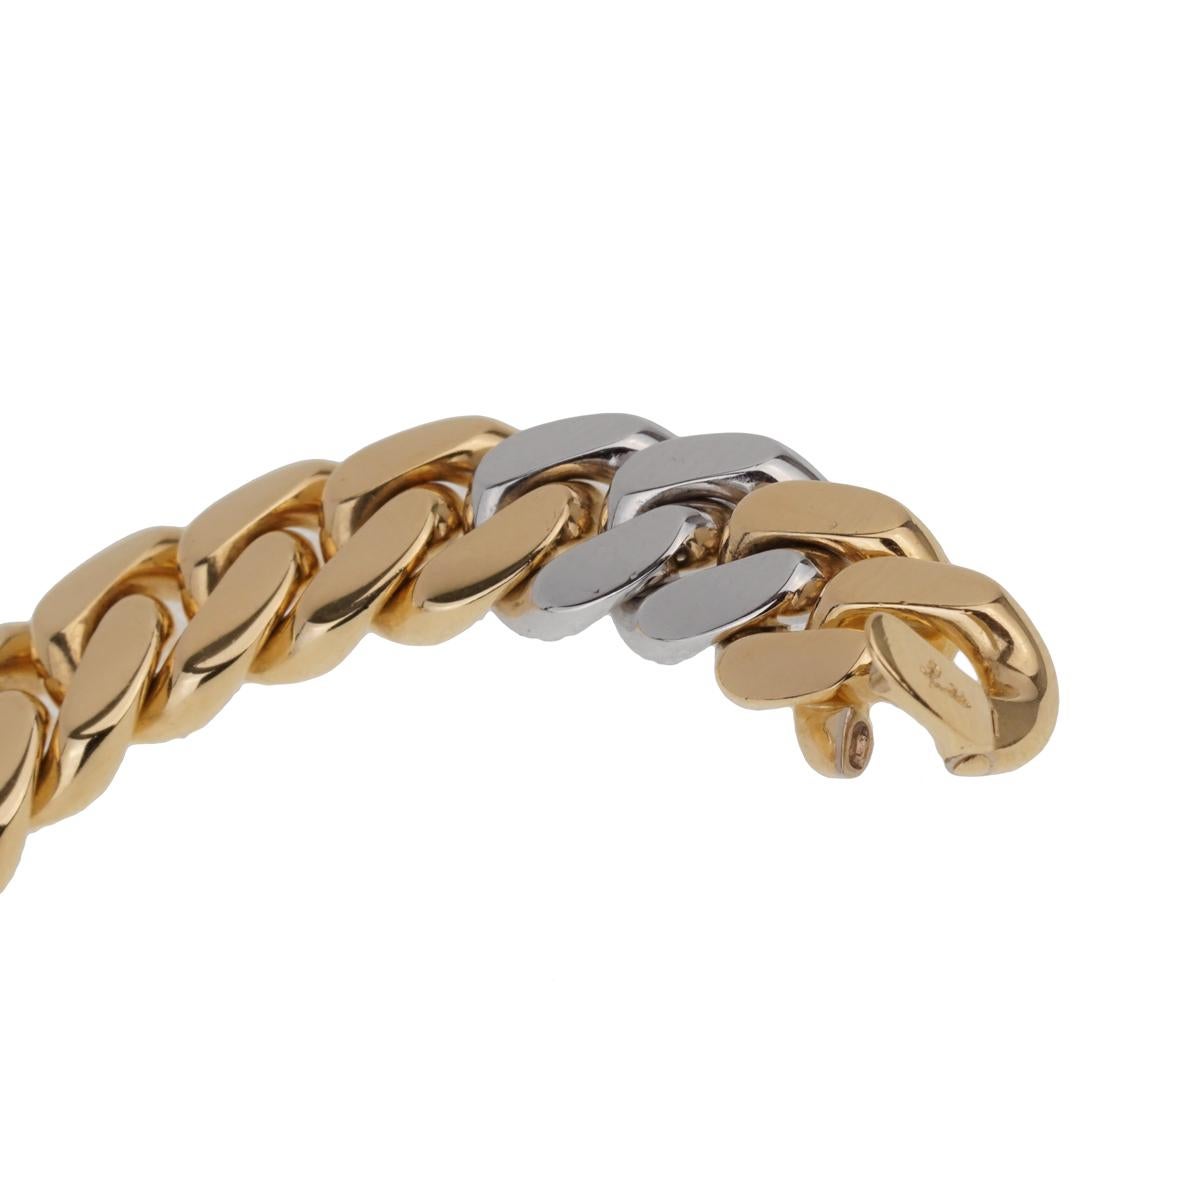 A must have piece by Pomellato featuring a two tone Cuban link bracelet in 18k white and yellow gold. The bracelet has a length of 7